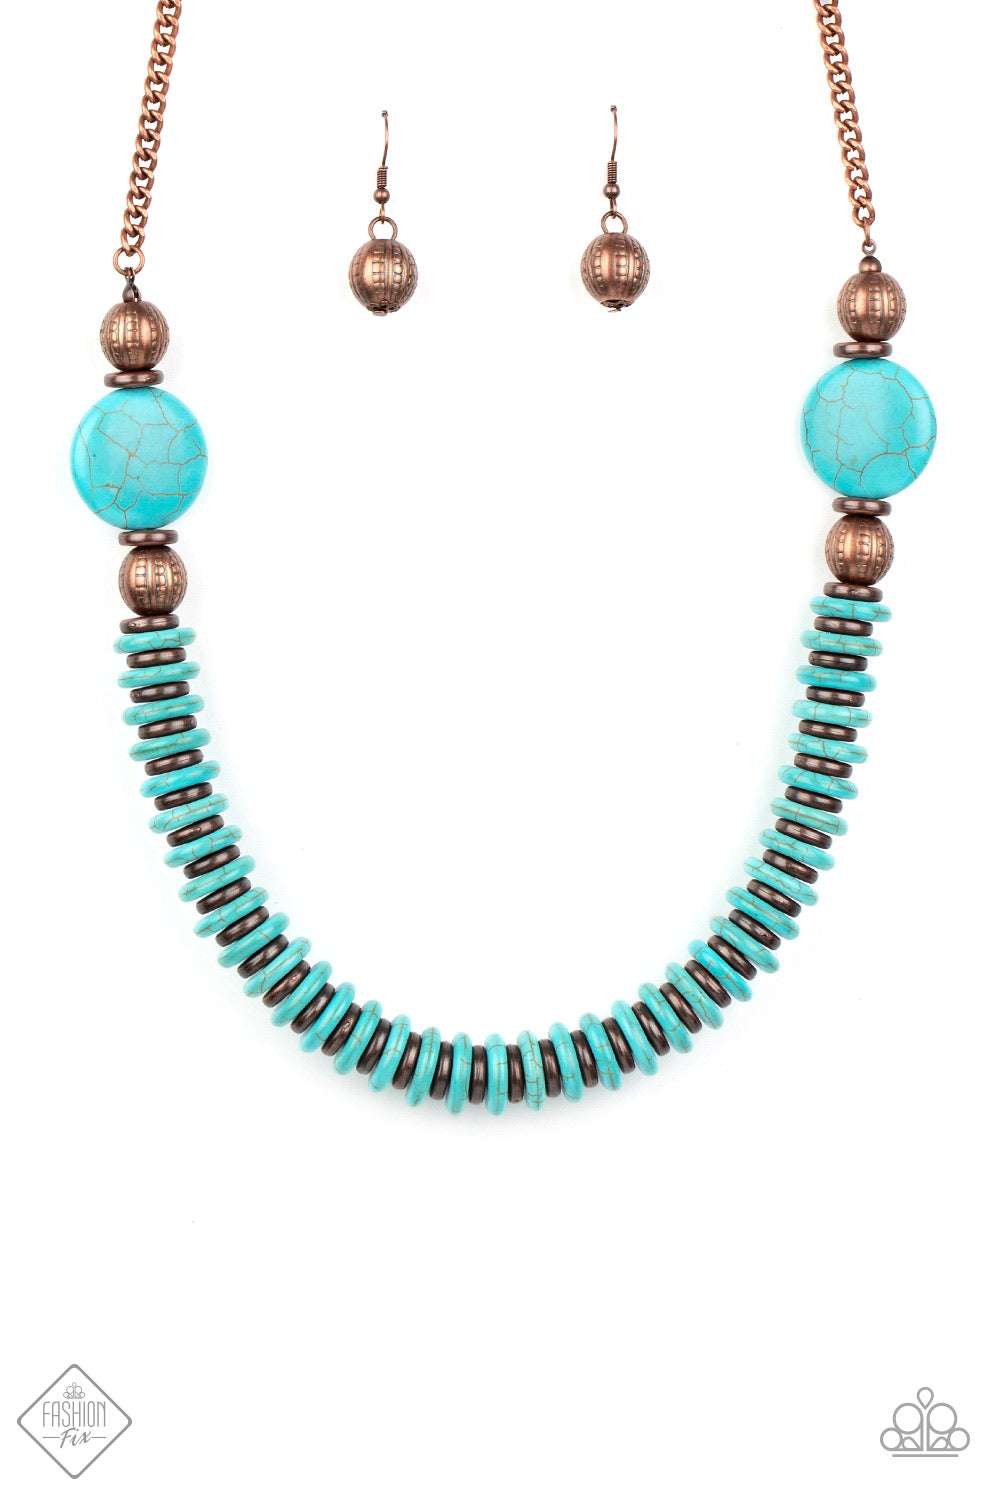 Desert Revival Necklace - Turquoise